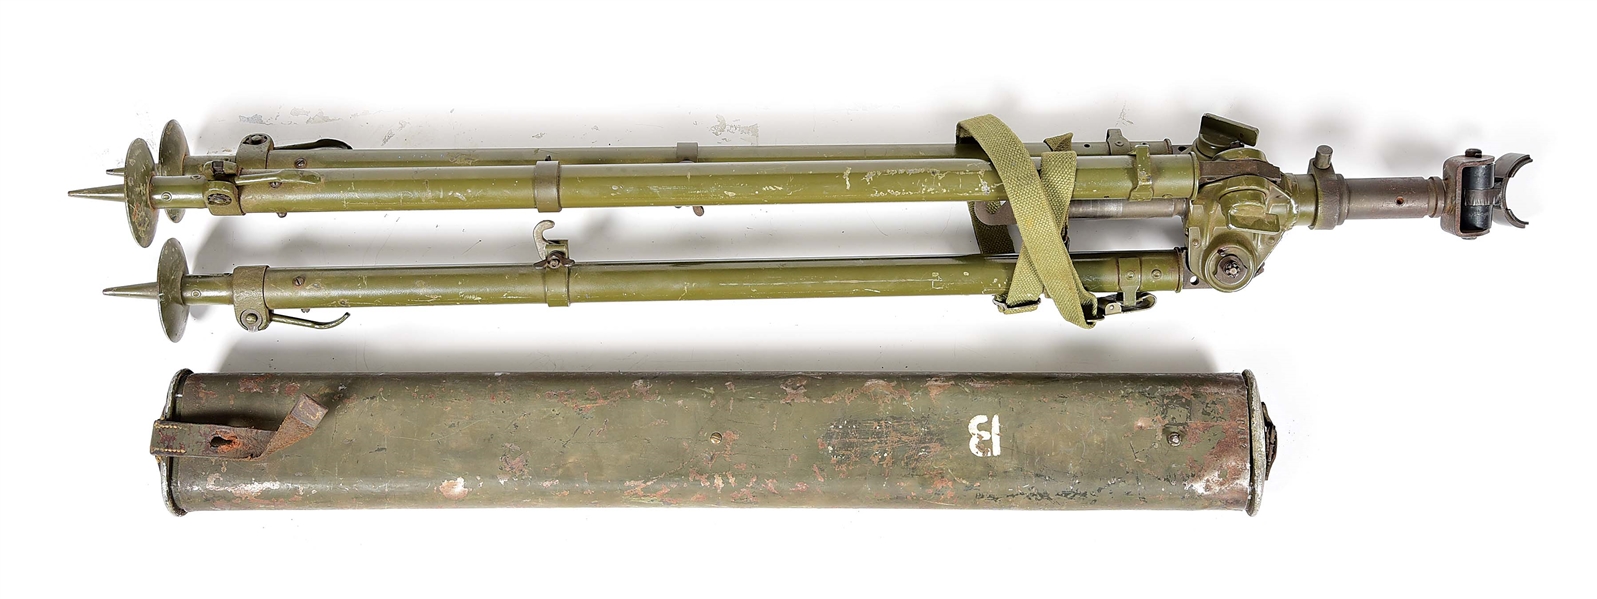 GERMAN MG-3 MACHINE GUN TRIPOD ADAPTED FOR USE WITH MG-34 AND MG-34 ORIGNAL DOUBLE BARREL CARRIER.